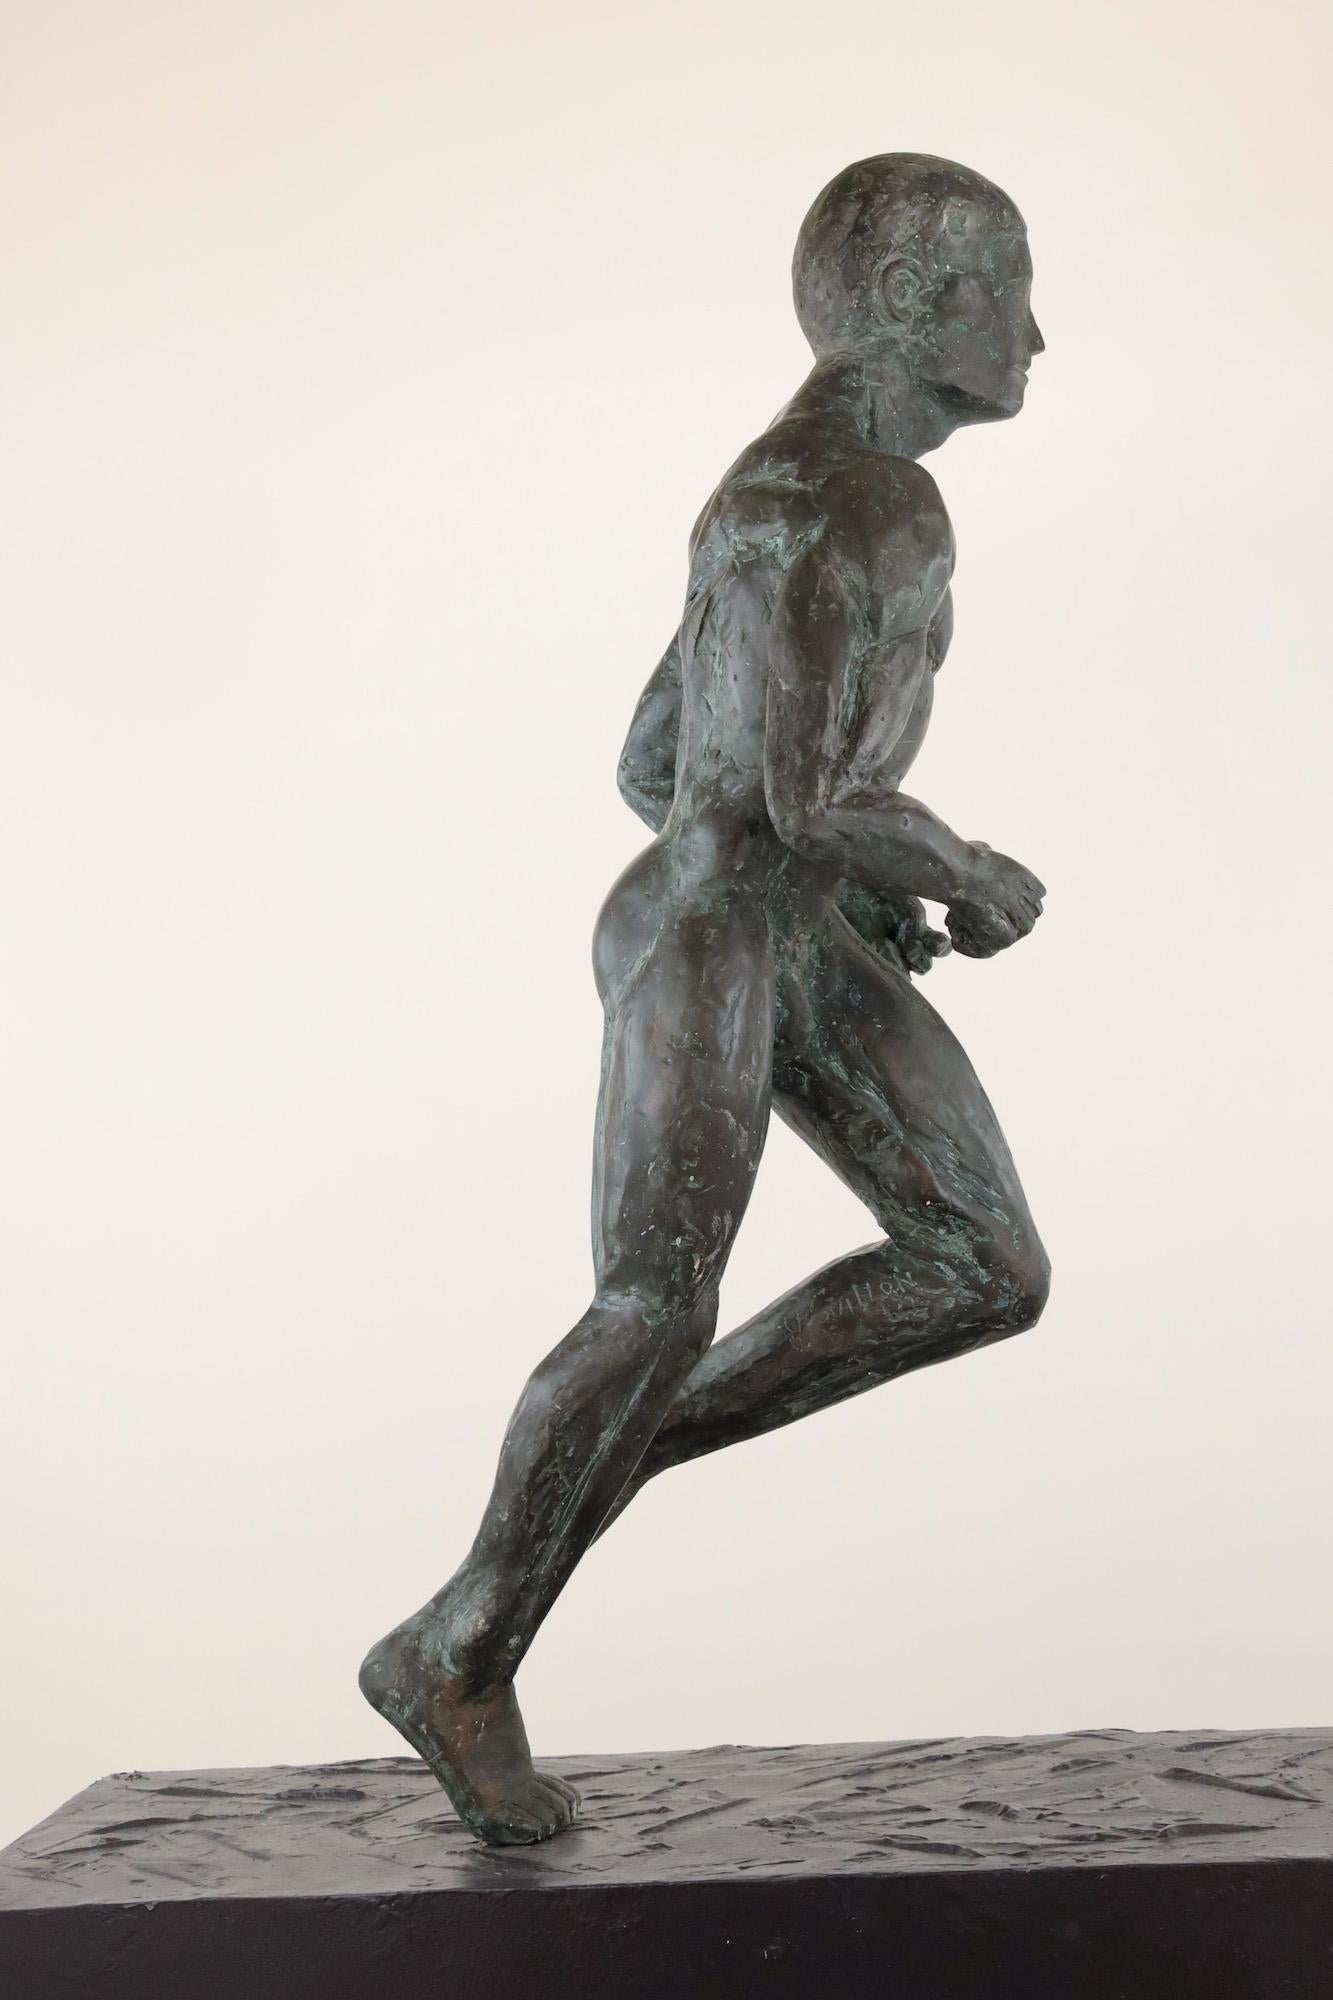 Large Runner is a bronze sculpture by contemporary artist Yann Guillon, dimensions including metal base are 120 × 60 × 80 cm (47.2 × 23.6 × 31.5 in). 
The sculpture is signed and numbered, it is part of a limited edition of 8 editions + 4 artist’s